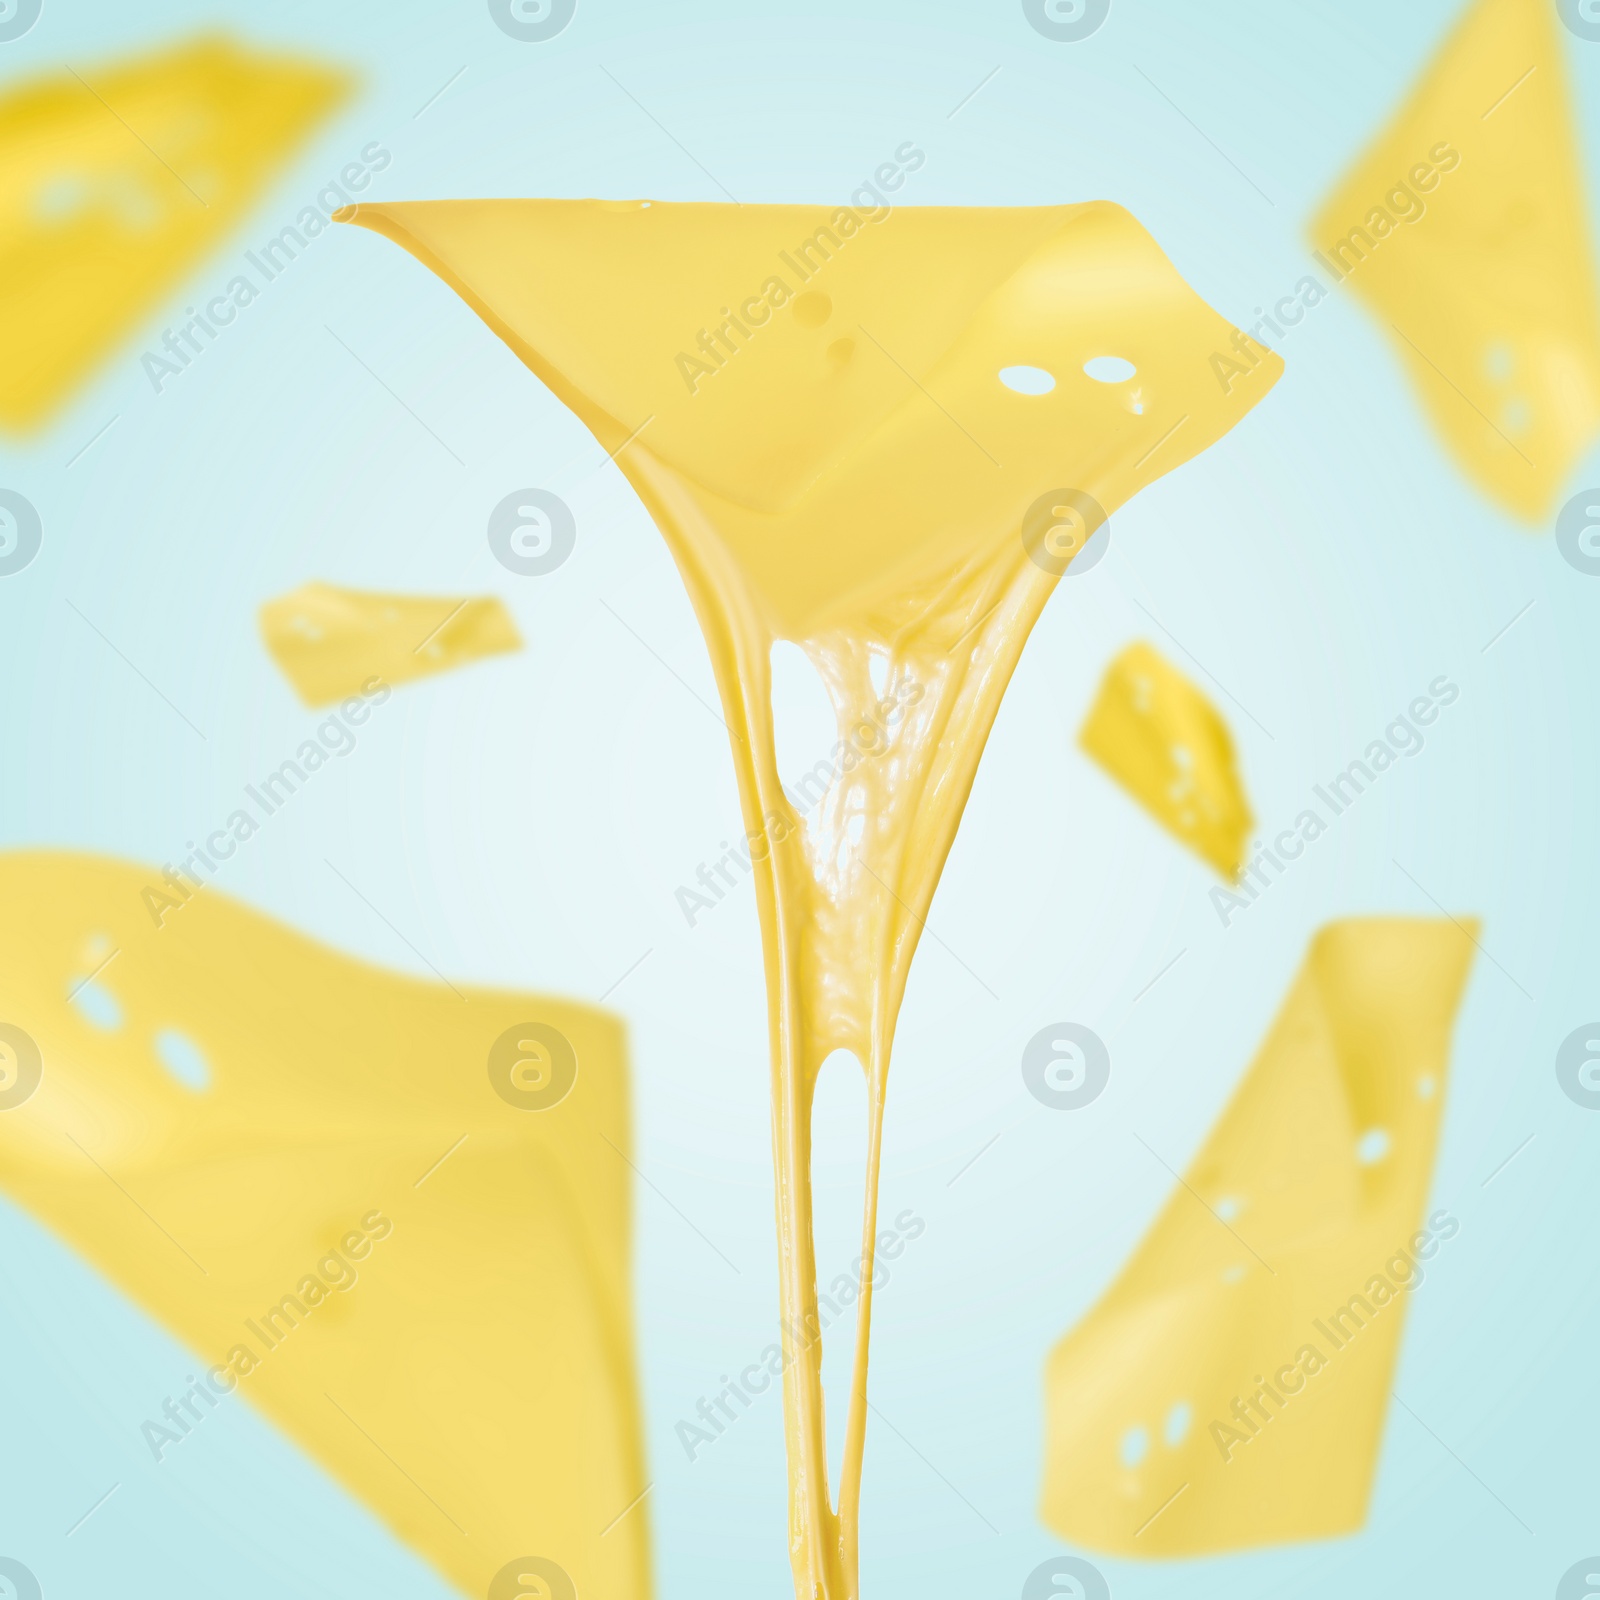 Image of Slices of cheese falling on light blue background